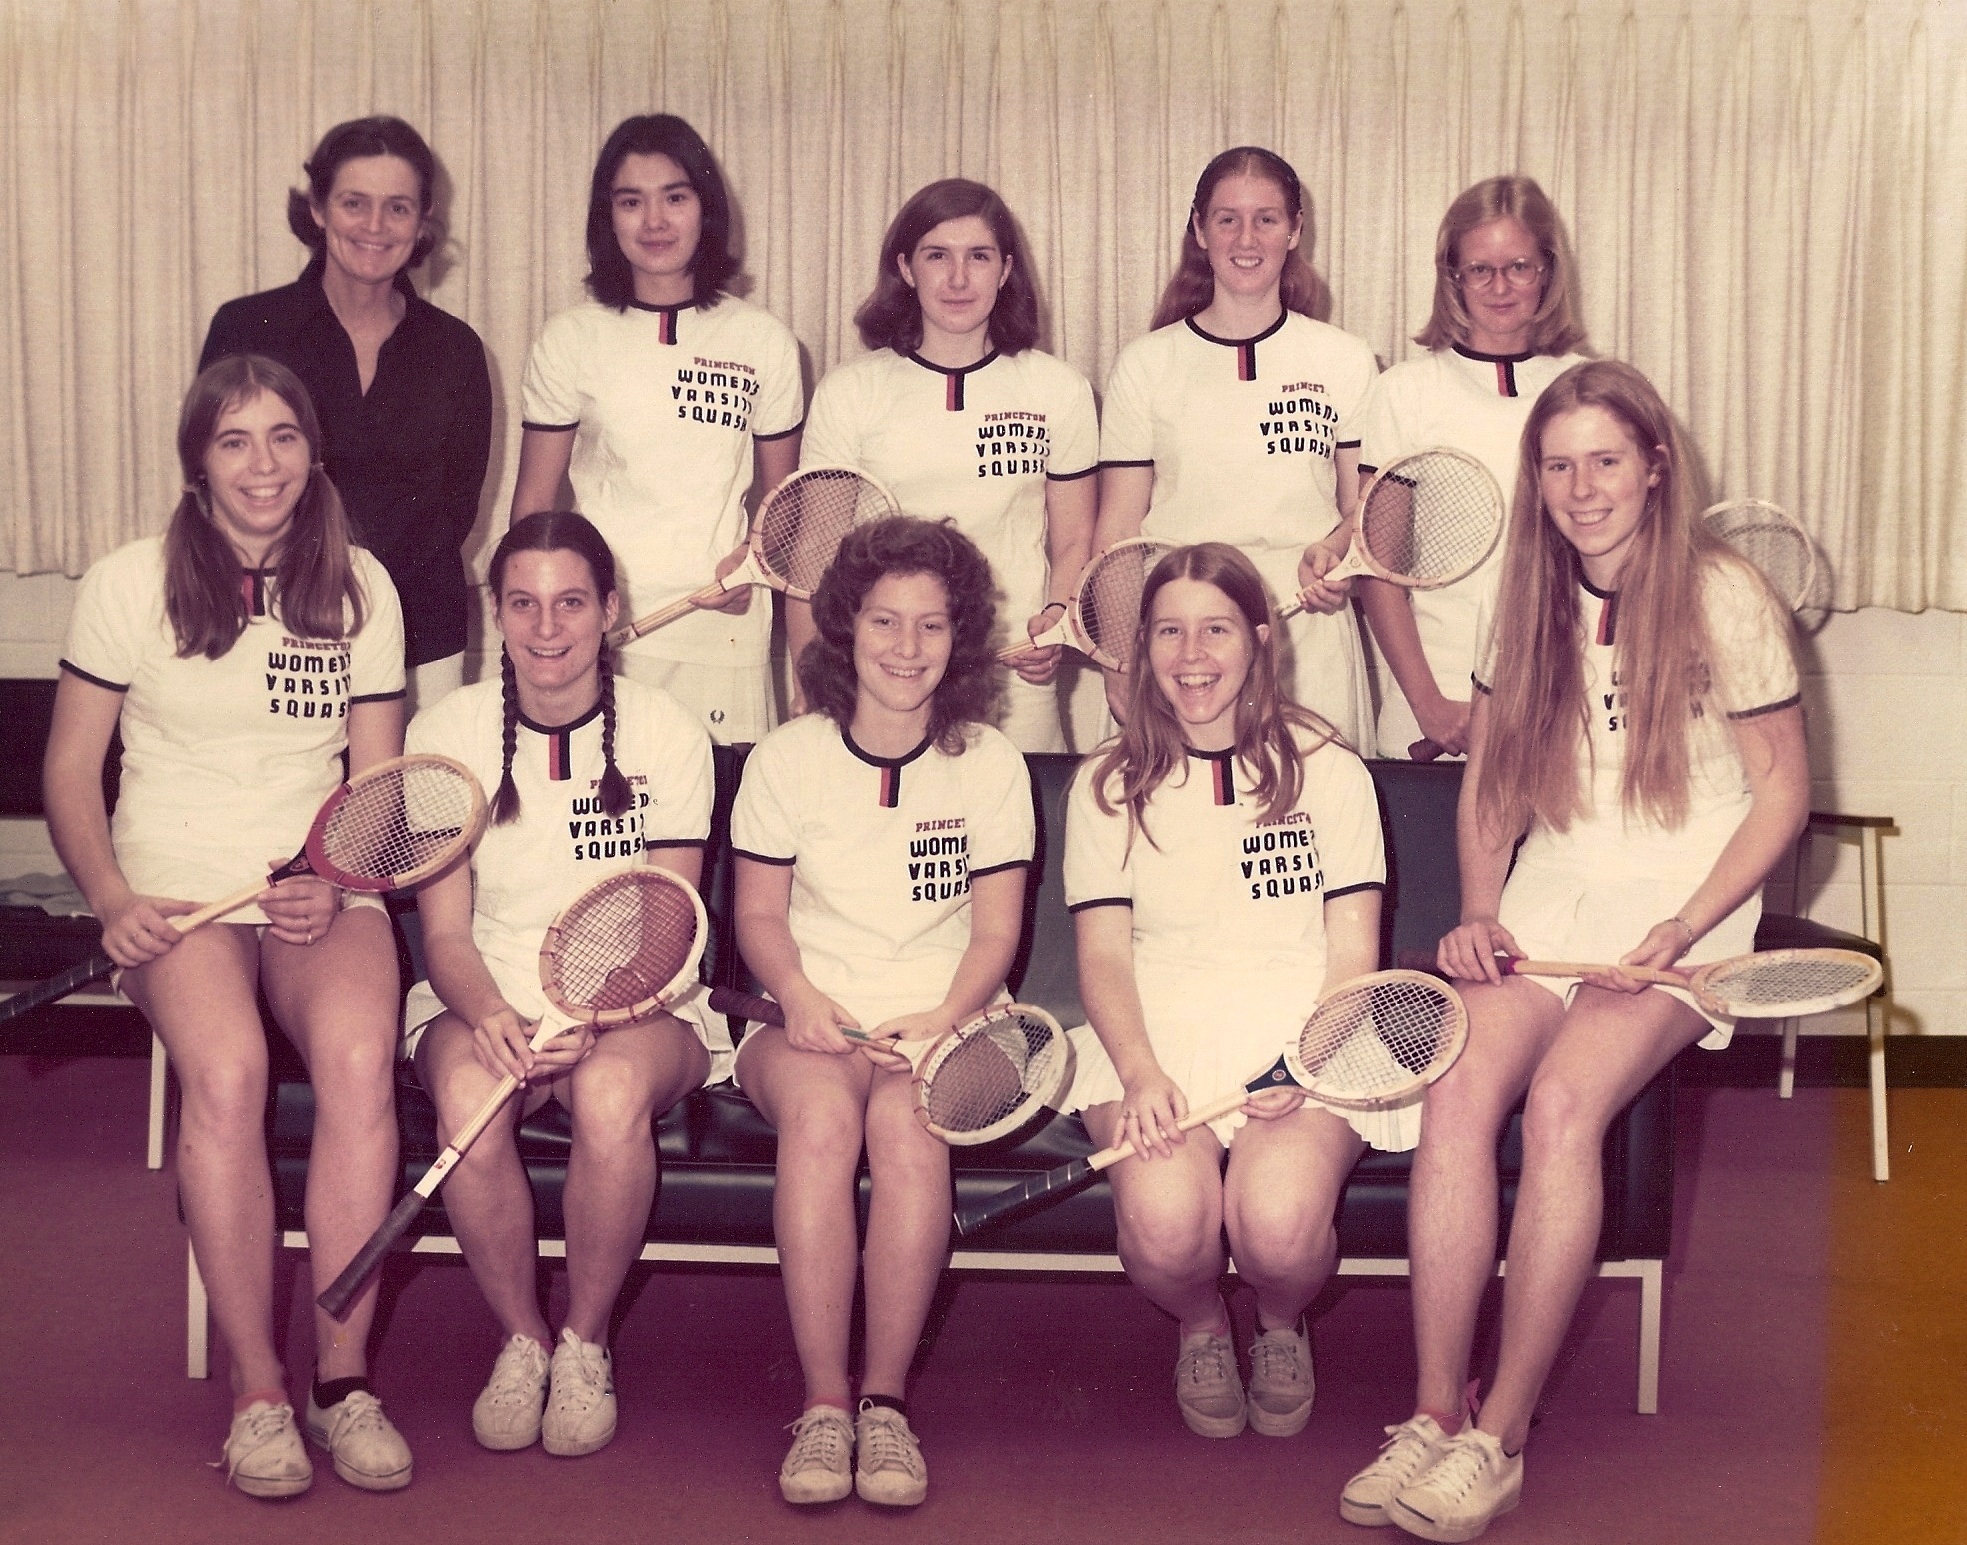 The brainchild of Betty Howe Constable and Pennsylvania coach Ann Wetzel, the intercollegiate Howe Cup (a trophy donated by Constable’s mother, Margaret Howe) began in 1973. Princeton won the Cup in 1973, the first of four straight. That 1973 team is pictured above (L-R, Top): Coach Constable, Kathy Hirata (‘75), Chris Kent (‘75), Tammy Foote, Claire Townsend (‘74); Front: CeCe Turner (‘75), Emily Goodfellow (‘76), Sally Fields (‘73, Captain), Nancy Carver (‘76), and Marion Freeman (‘74).